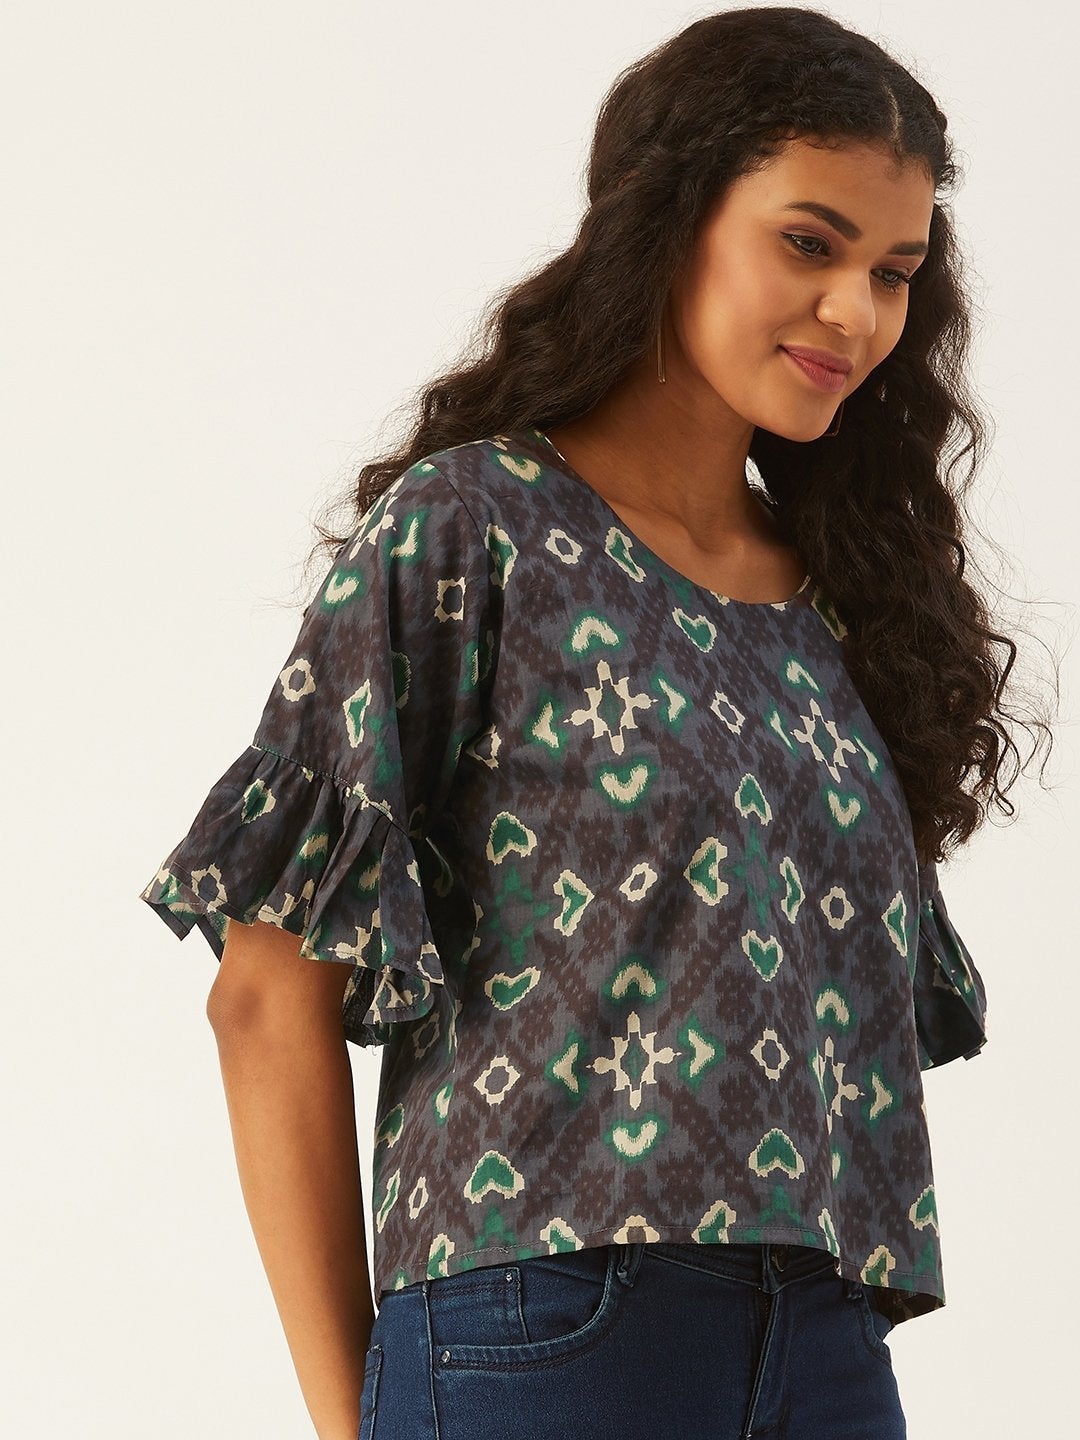 Women's Grey-Green Top  With Frill Sleeve - InWeave